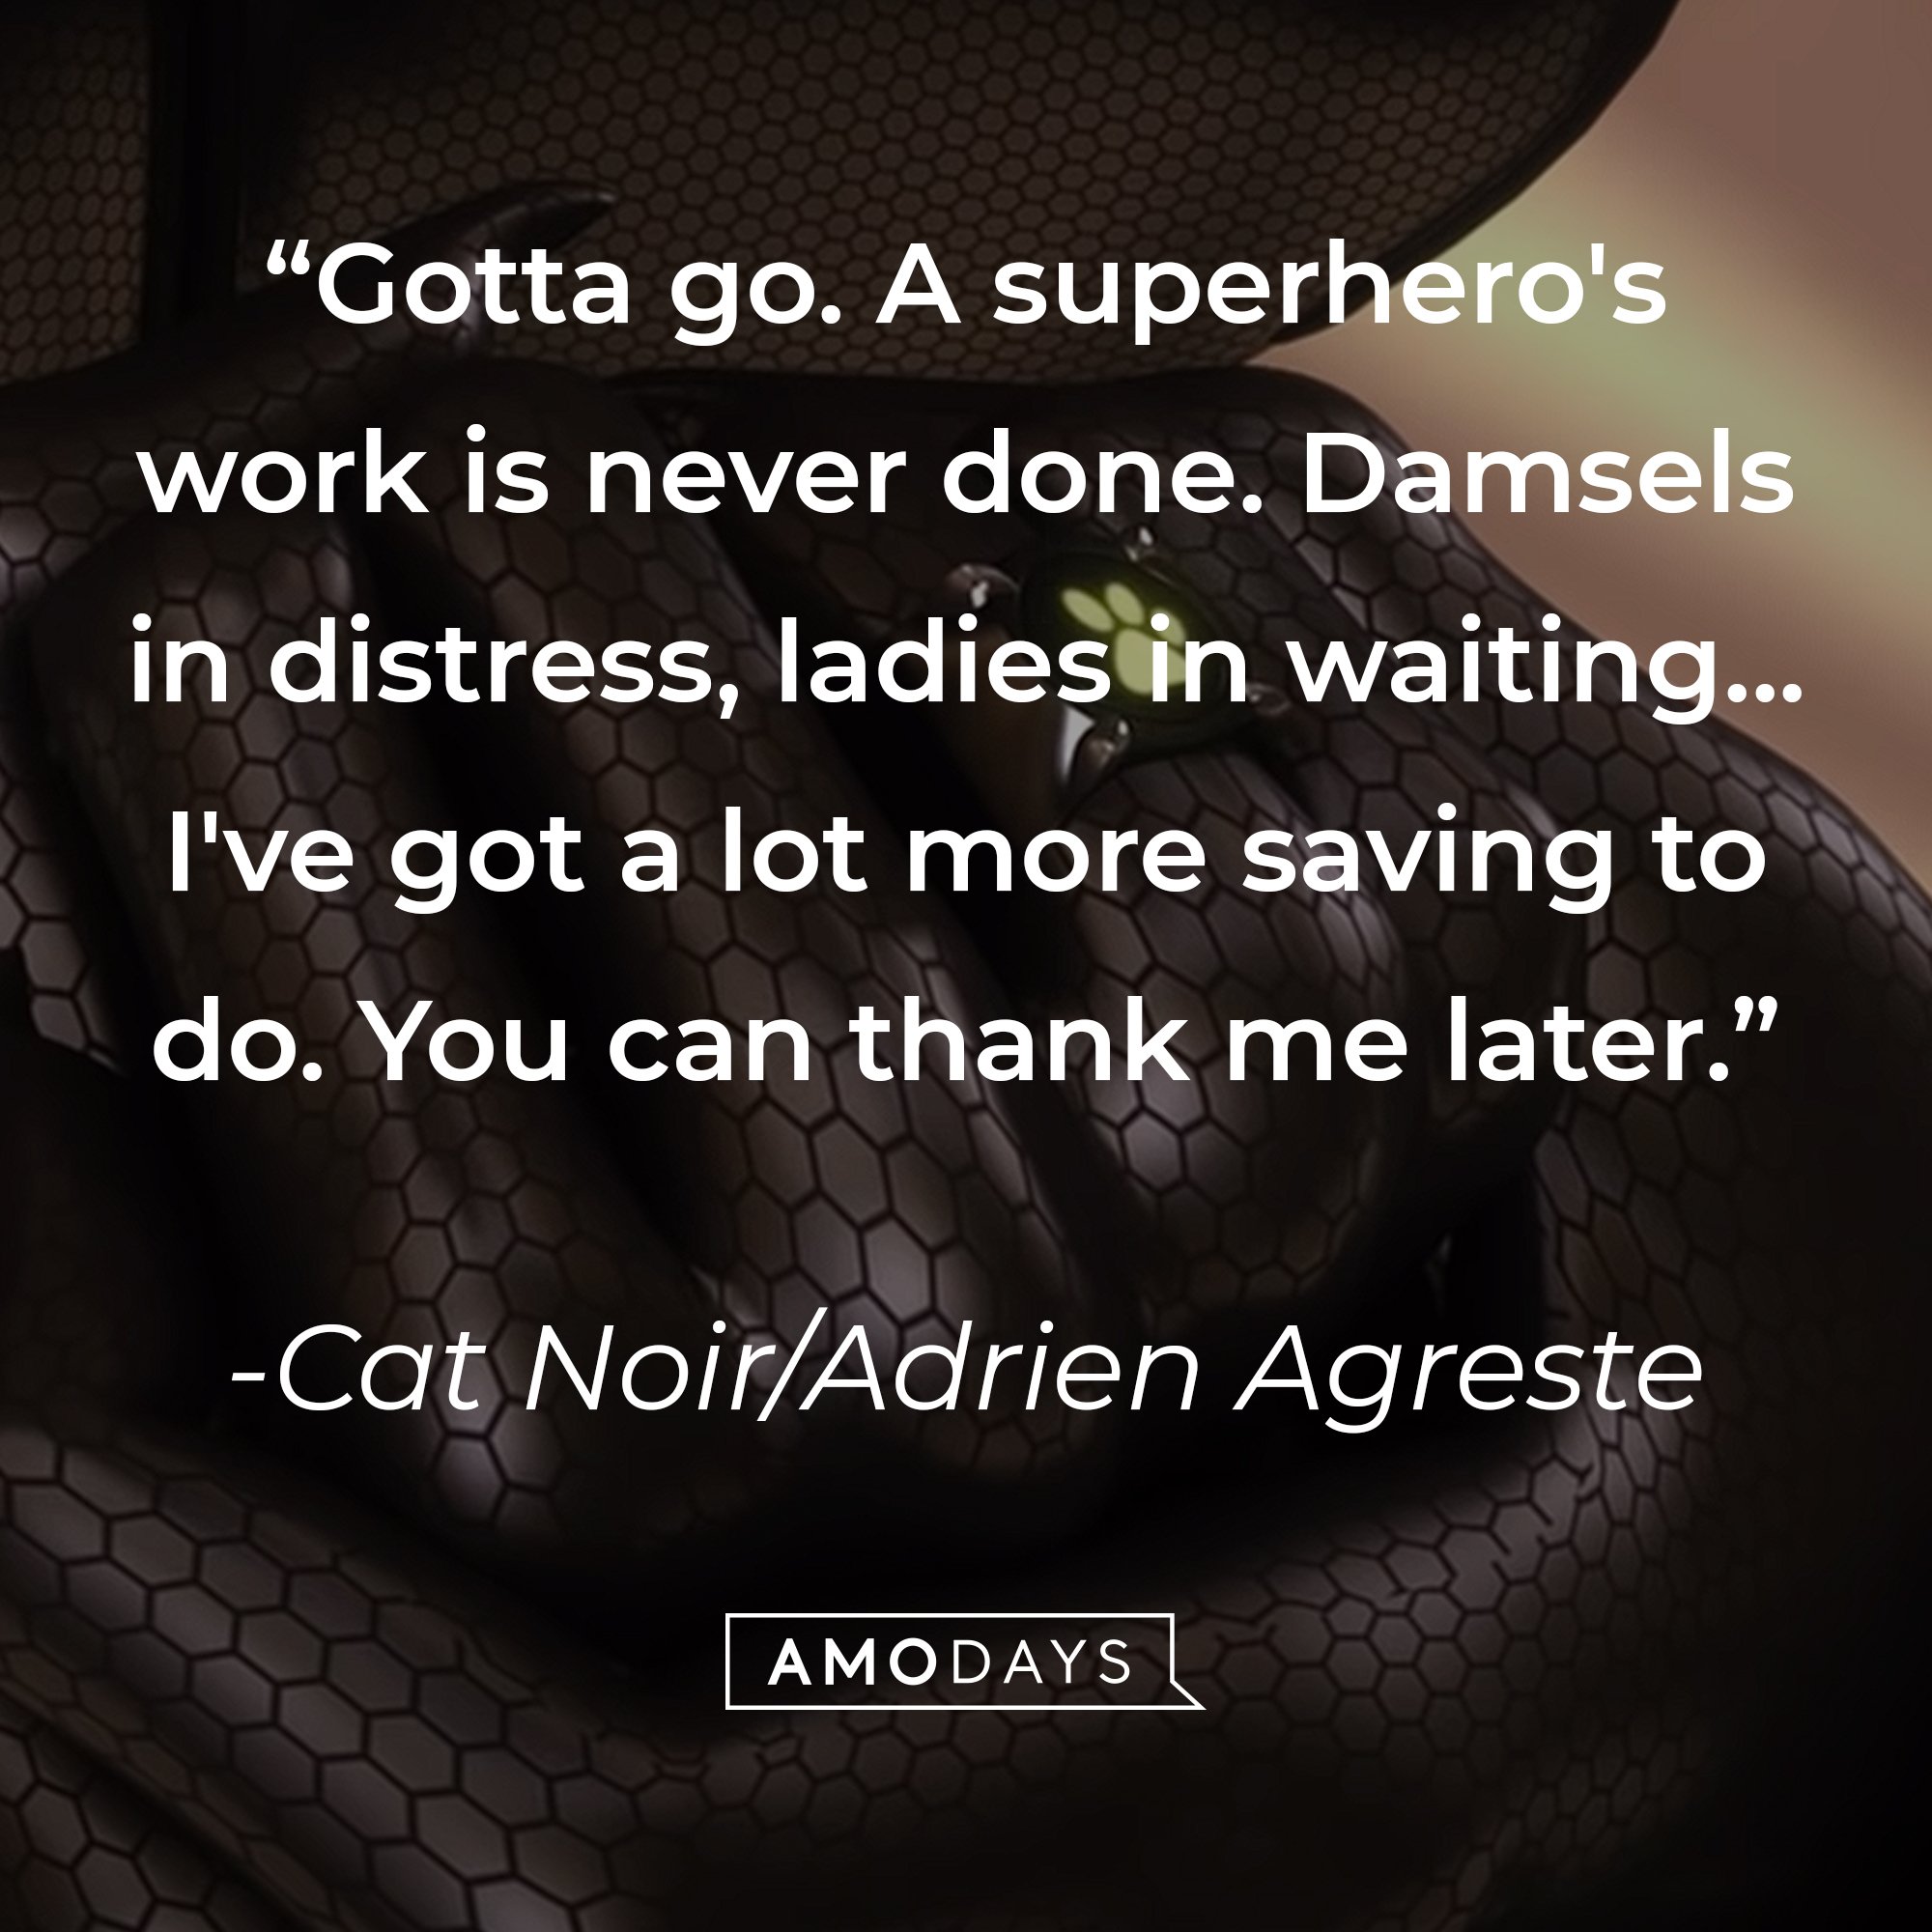  Cat Noir/Adrien Agreste’s quote: “Gotta go. A superhero's work is never done. Damsels in distress, ladies in waiting... I've got a lot more saving to do. You can thank me later.”  | Image: AmoDays 